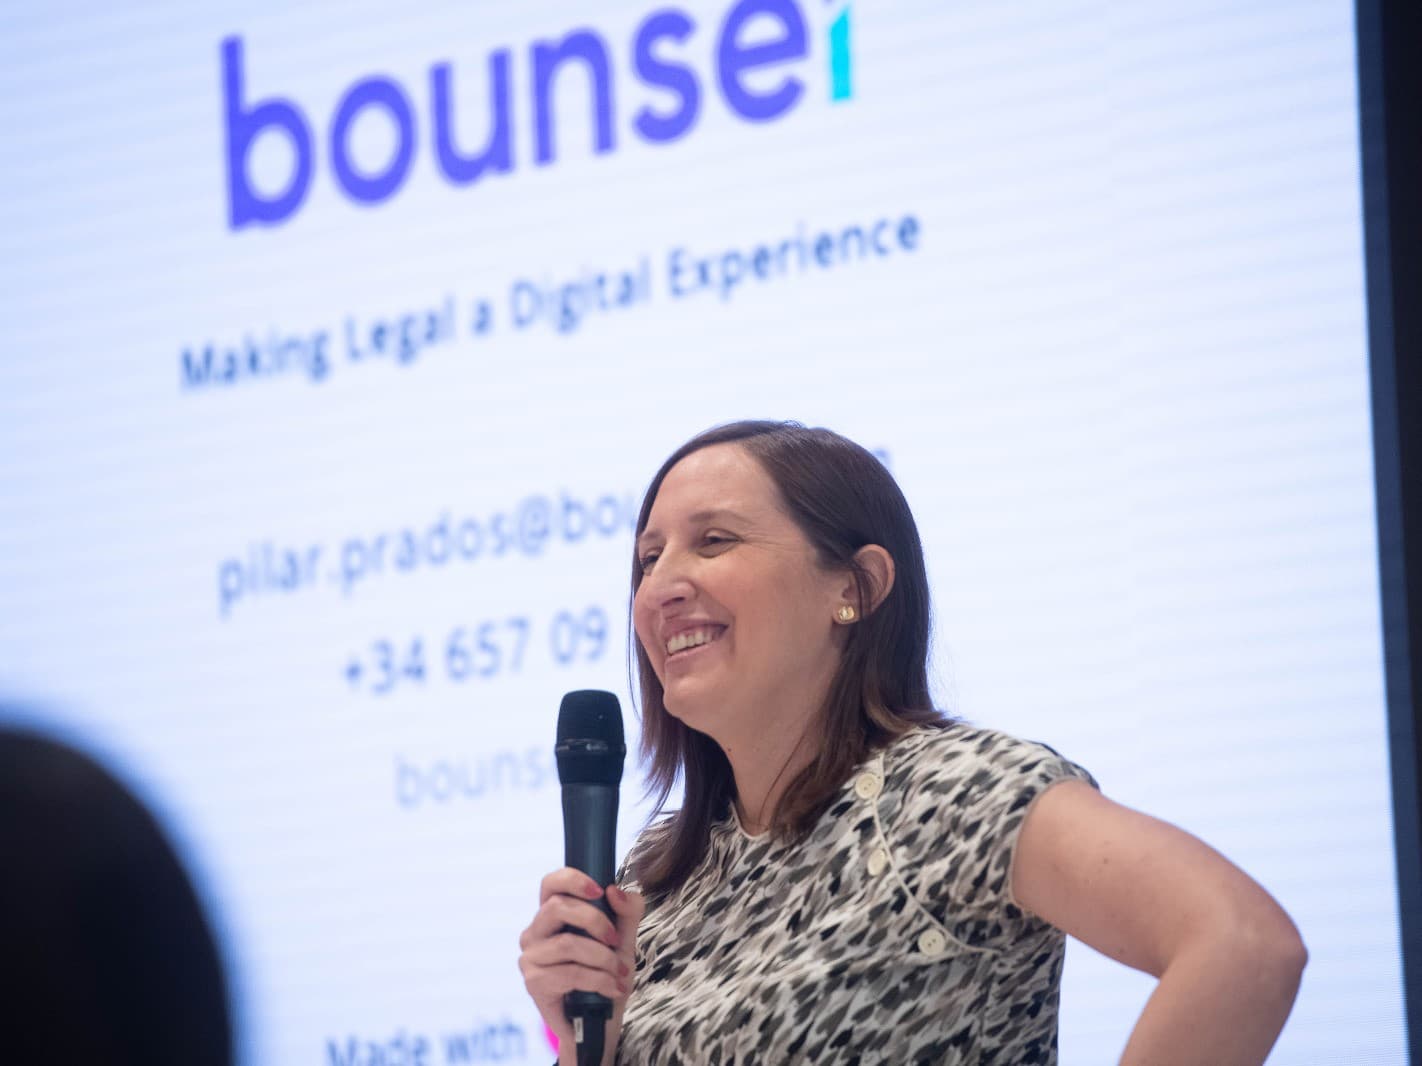 Bounsel, awarded best seed company at Capital4Startups